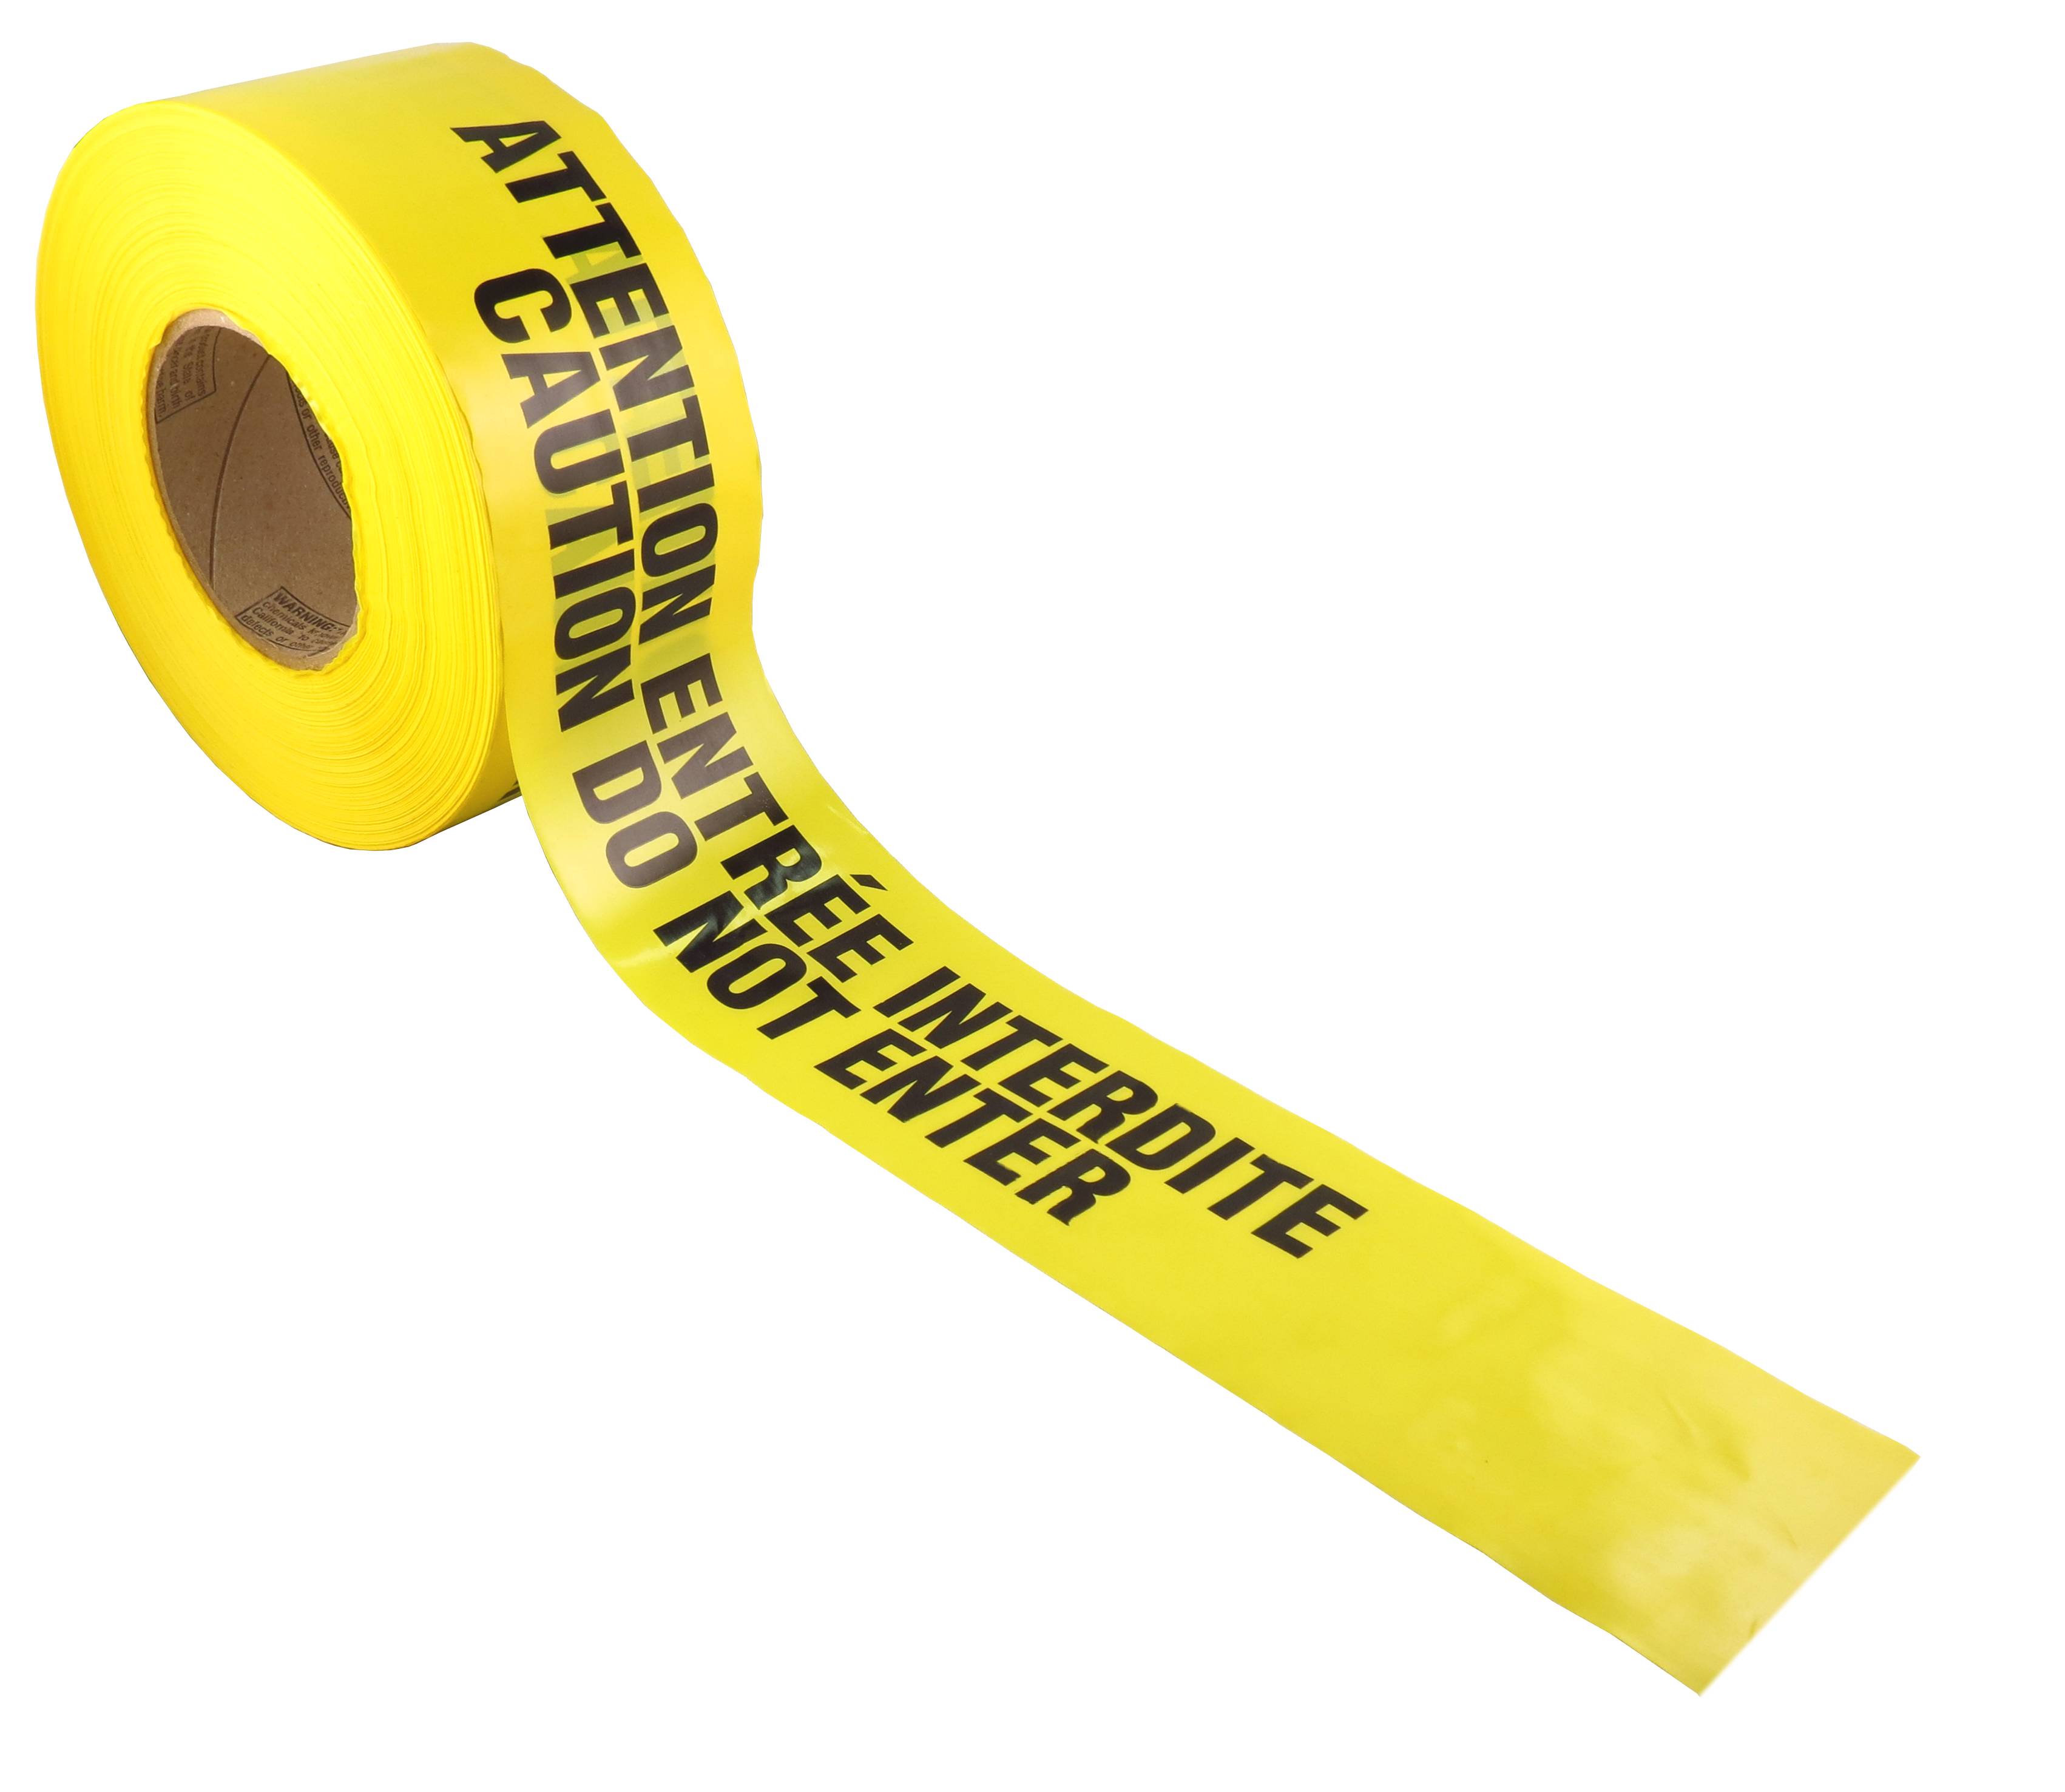 Yellow Caution Do Not Enter Barricade Tape 3 X 1000 • Bright Yellow with a 